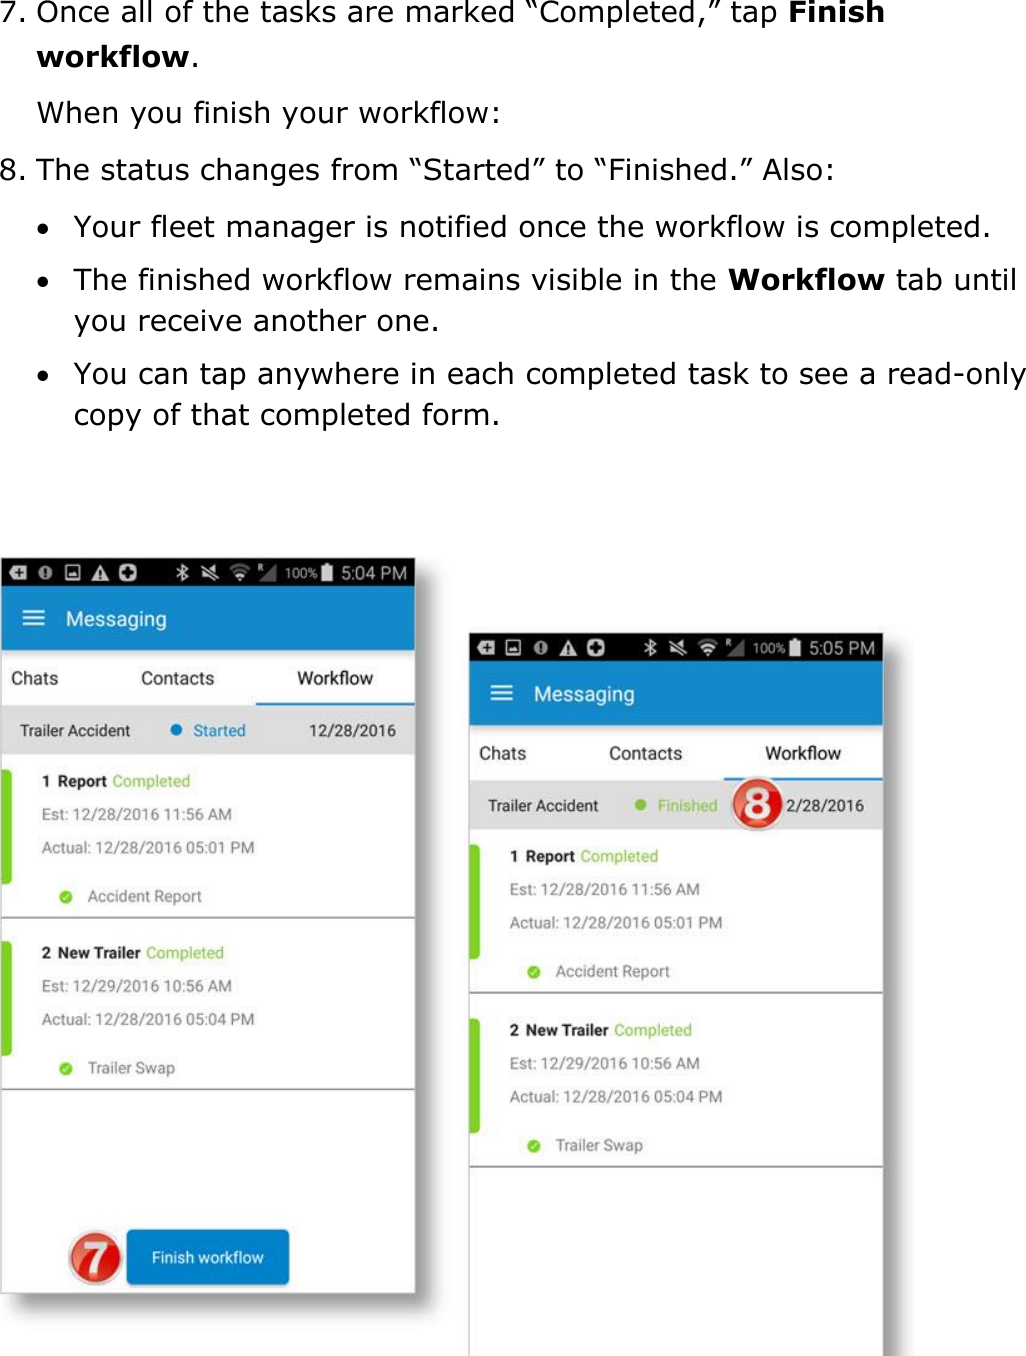 Send Messages, Forms, and Workflows DriverConnect User Guide  80 © 2017, Rand McNally, Inc. 7. Once all of the tasks are marked “Completed,” tap Finish workflow. When you finish your workflow: 8. The status changes from “Started” to “Finished.” Also:  Your fleet manager is notified once the workflow is completed.  The finished workflow remains visible in the Workflow tab until you receive another one.  You can tap anywhere in each completed task to see a read-only copy of that completed form.  